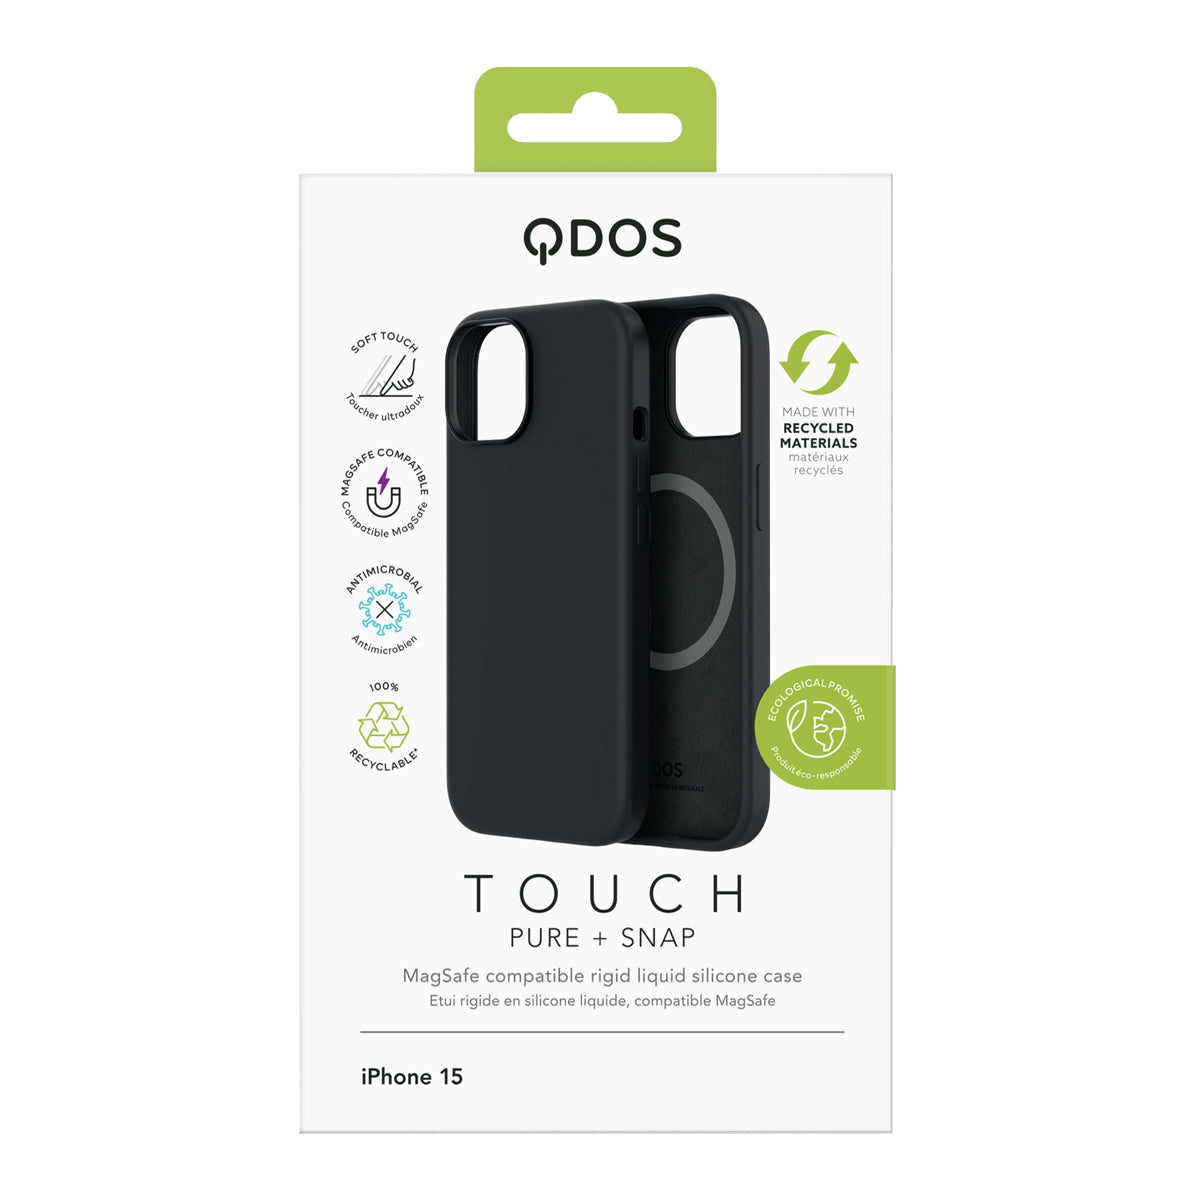 Touch Pure + Snap for iPhone 15 - Black